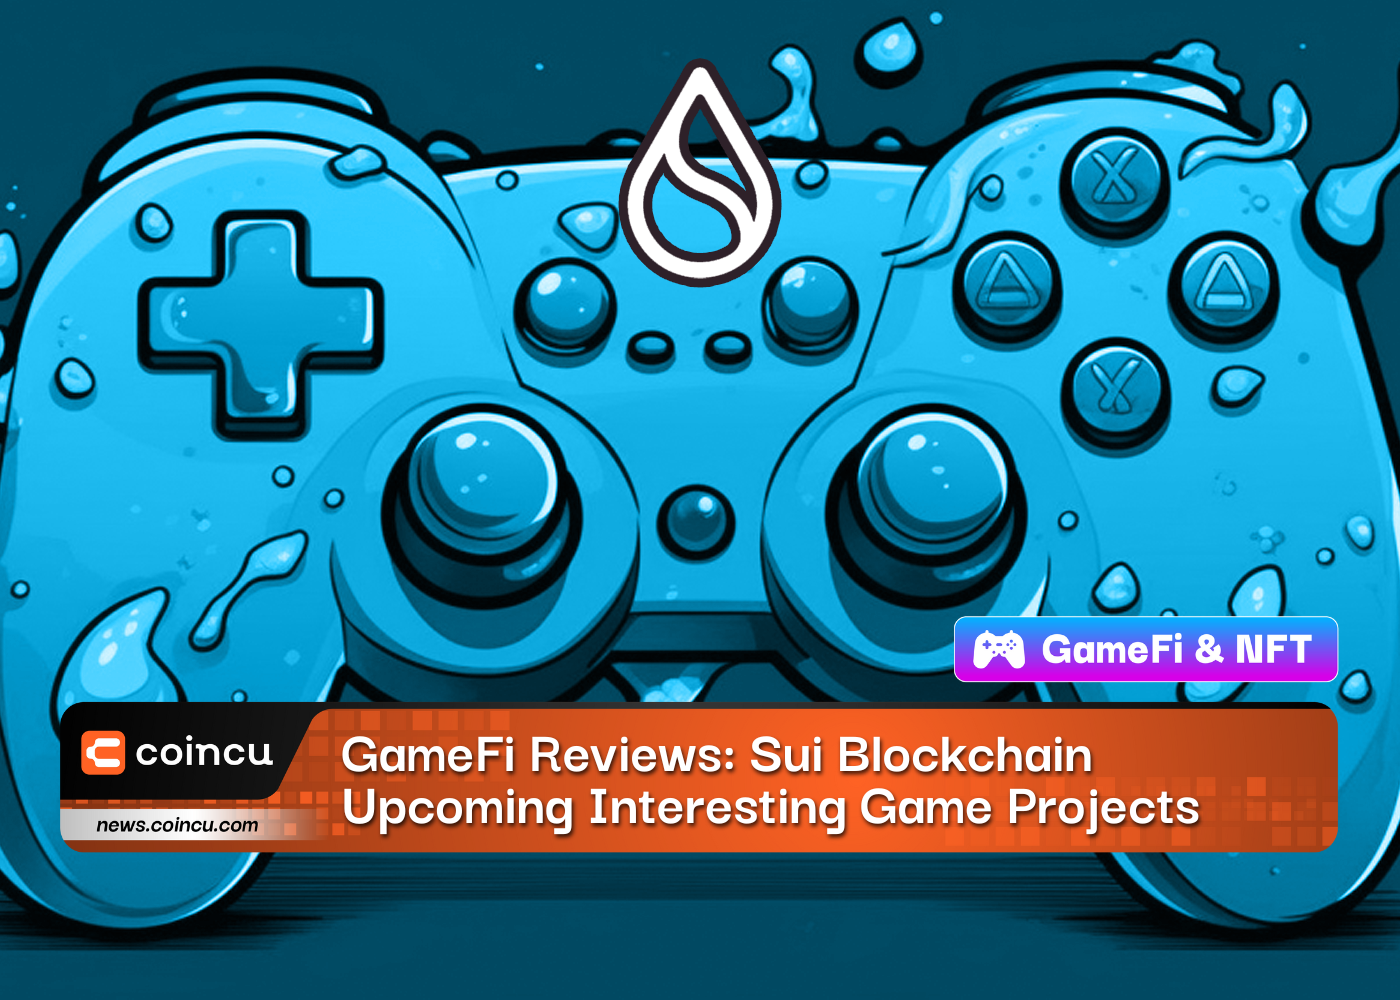 GameFi Reviews: Sui Blockchain Upcoming Interesting Game Projects